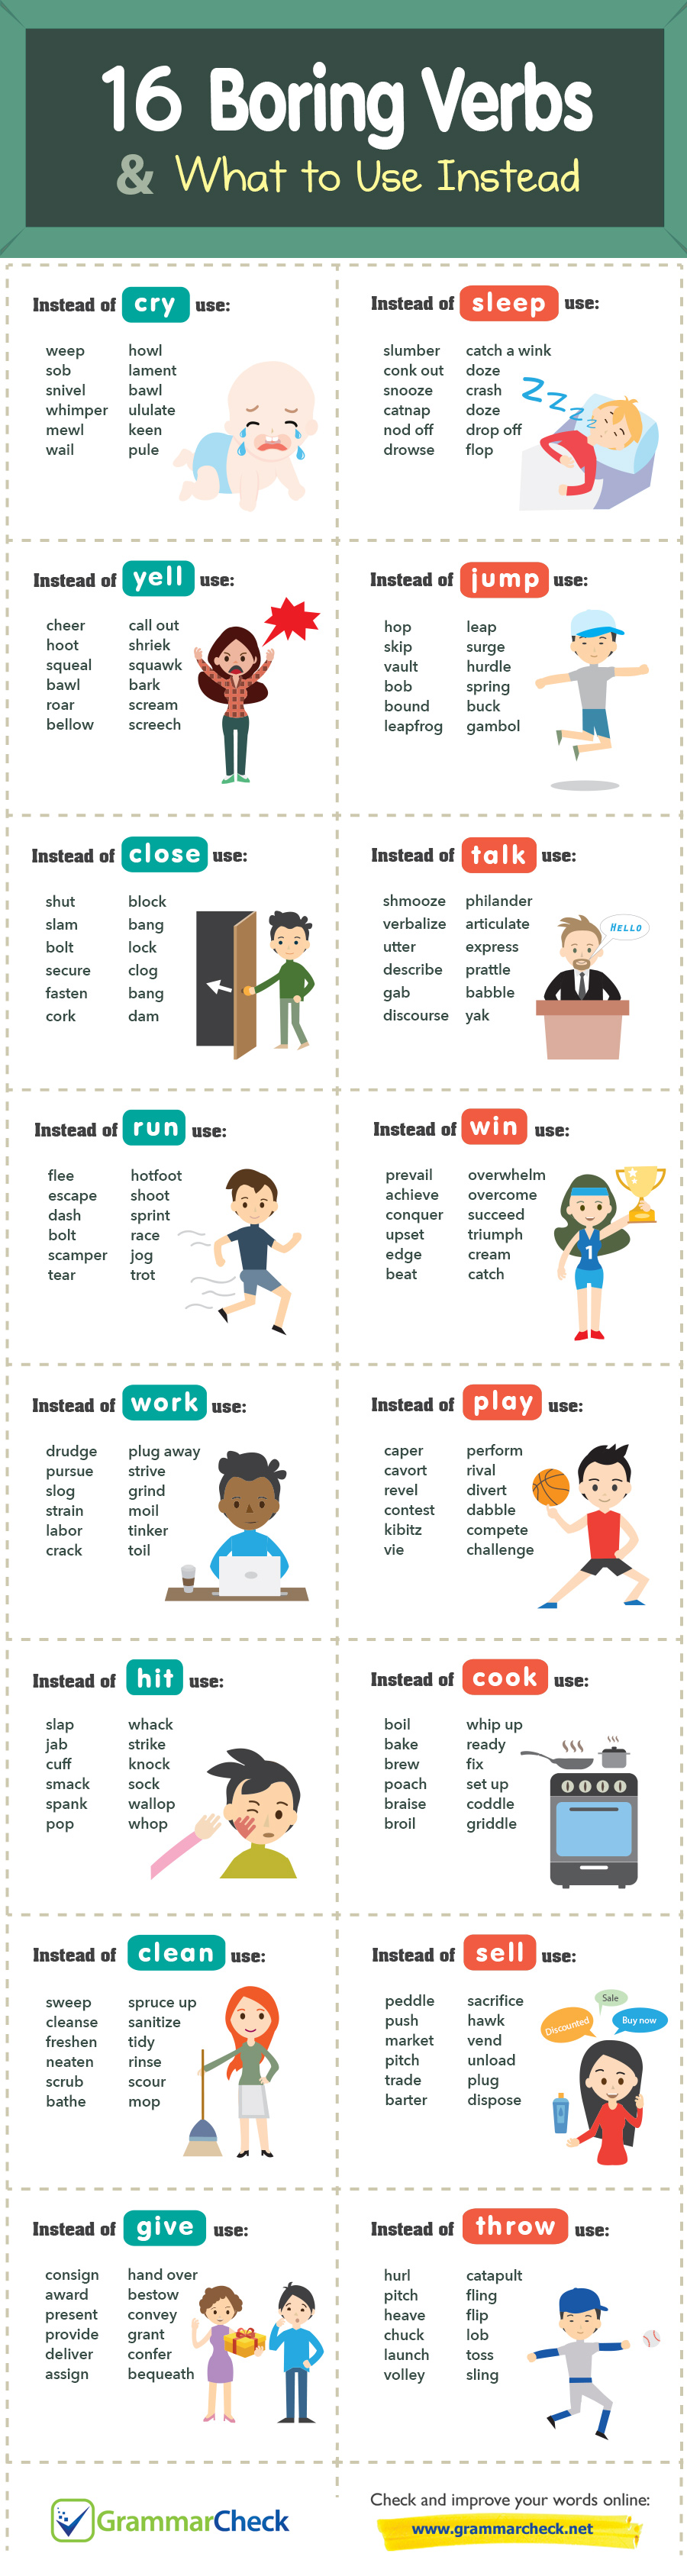 16 Boring Verbs & What to Use Instead (Infographic)